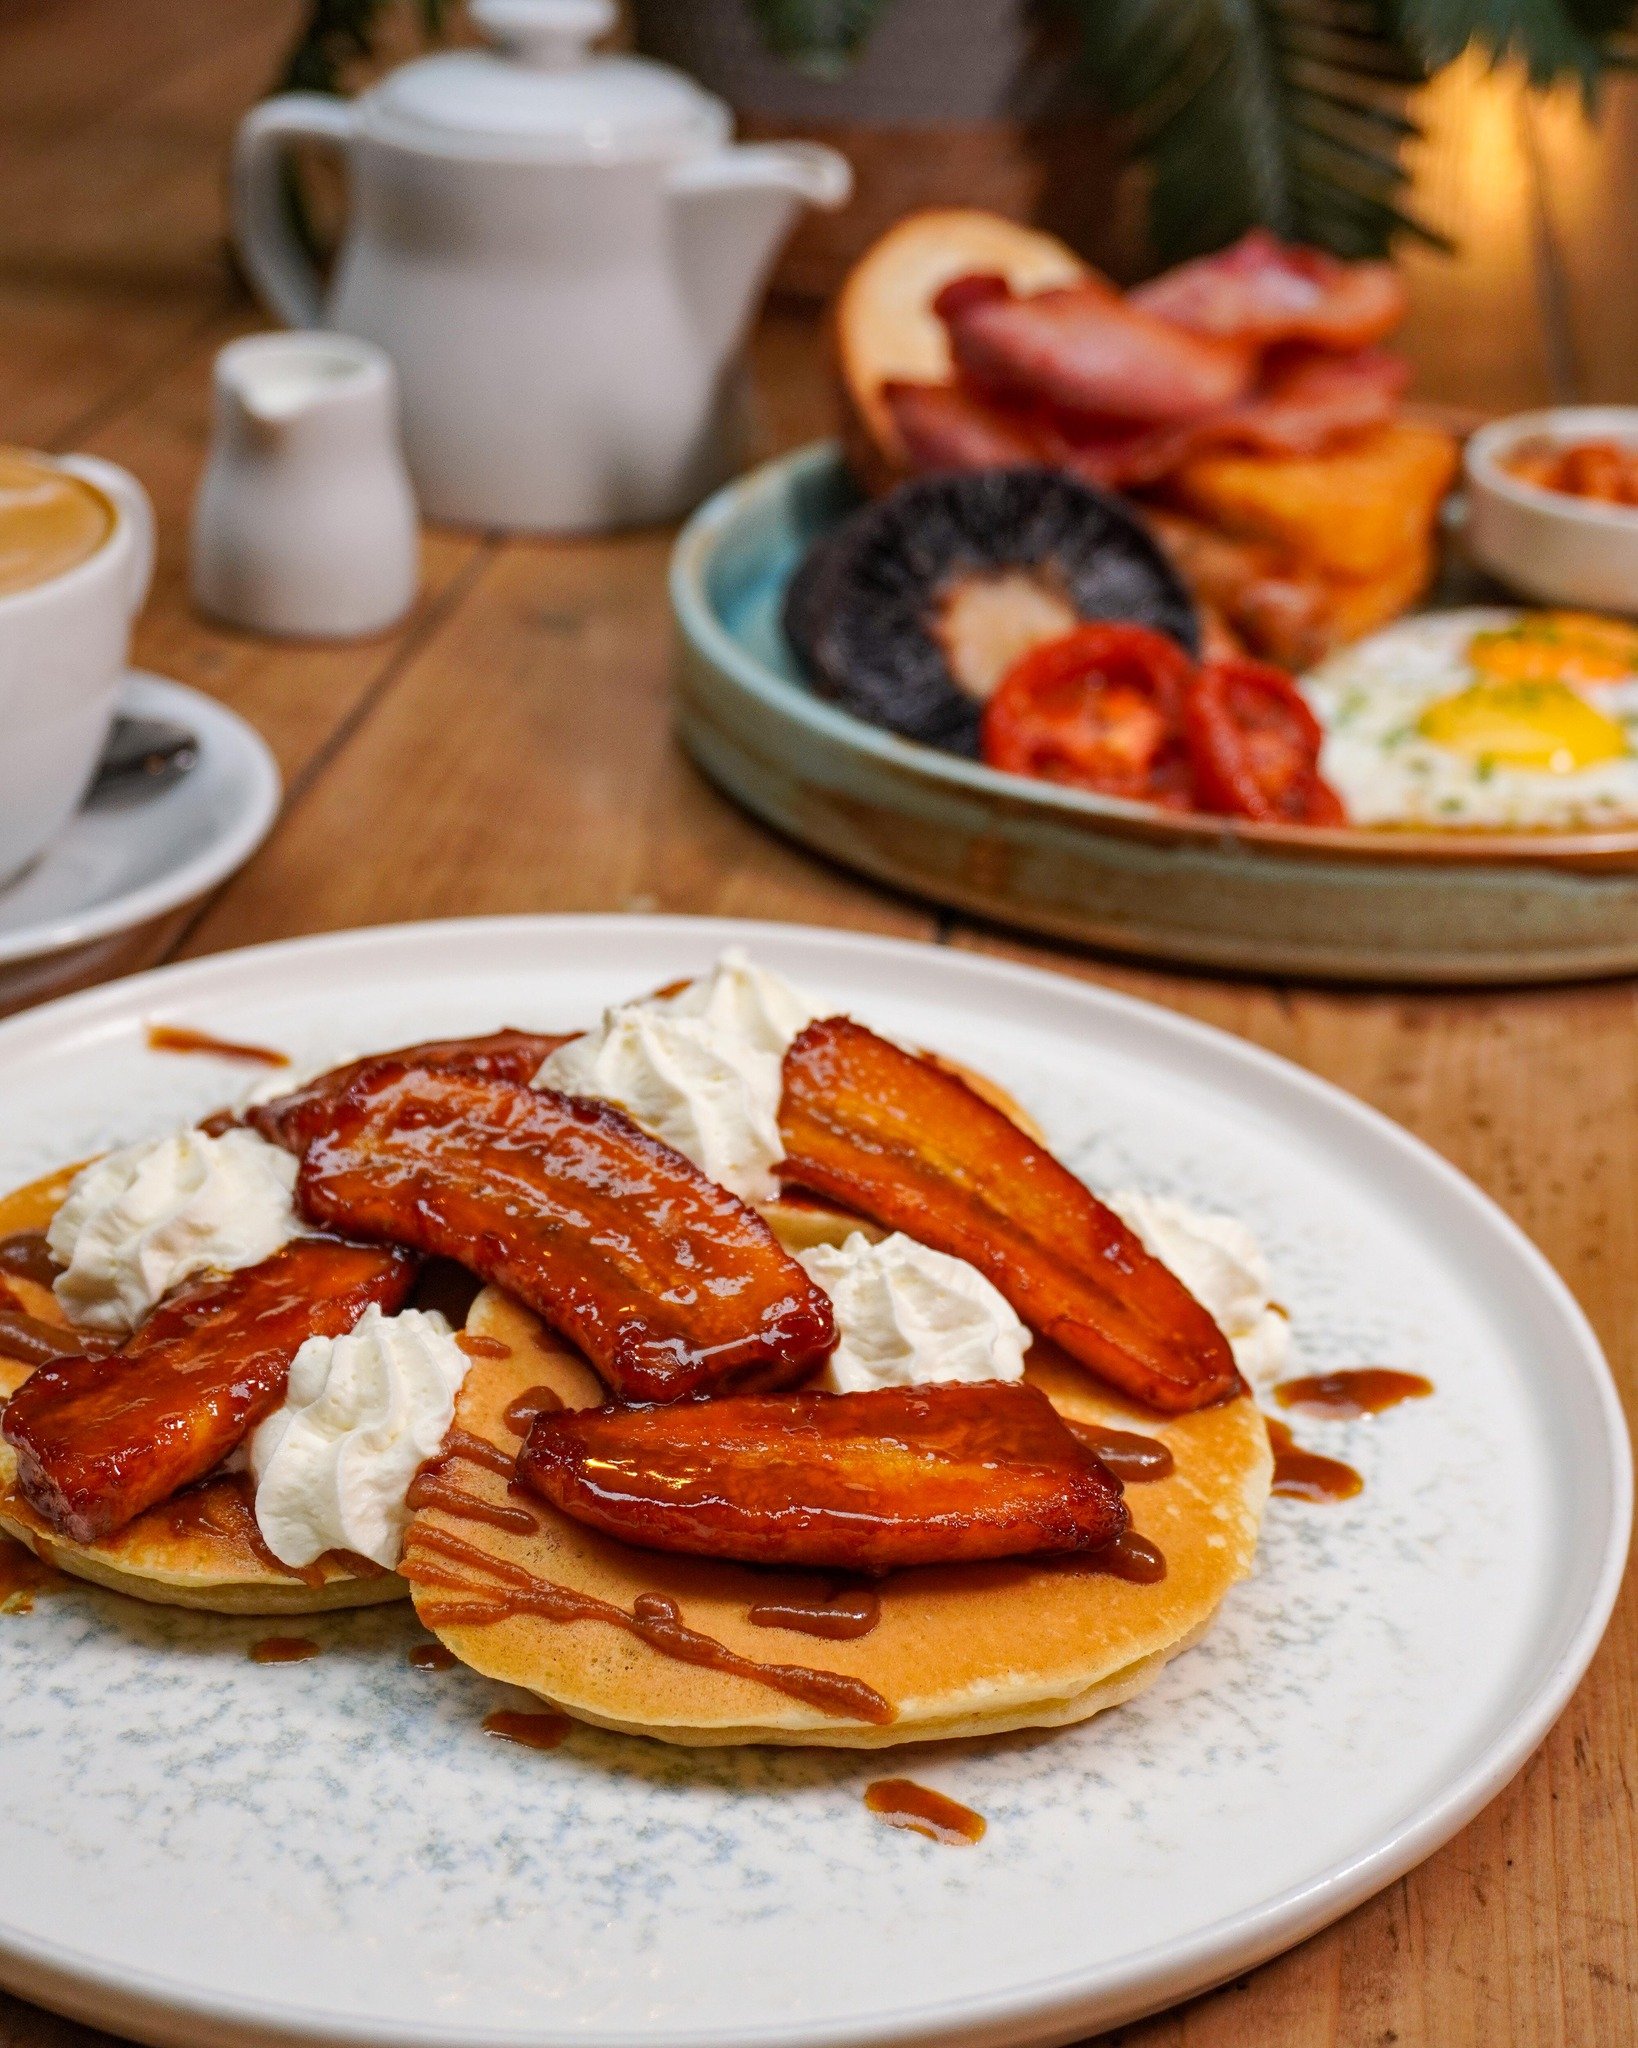 Come and join us for our brunch menu and warm up with a full English, or some American style pancakes for those with a sweet tooth 😋🥞🥓

#brunch #tynemouth #tynemouthfood #tynemouthrestaurant